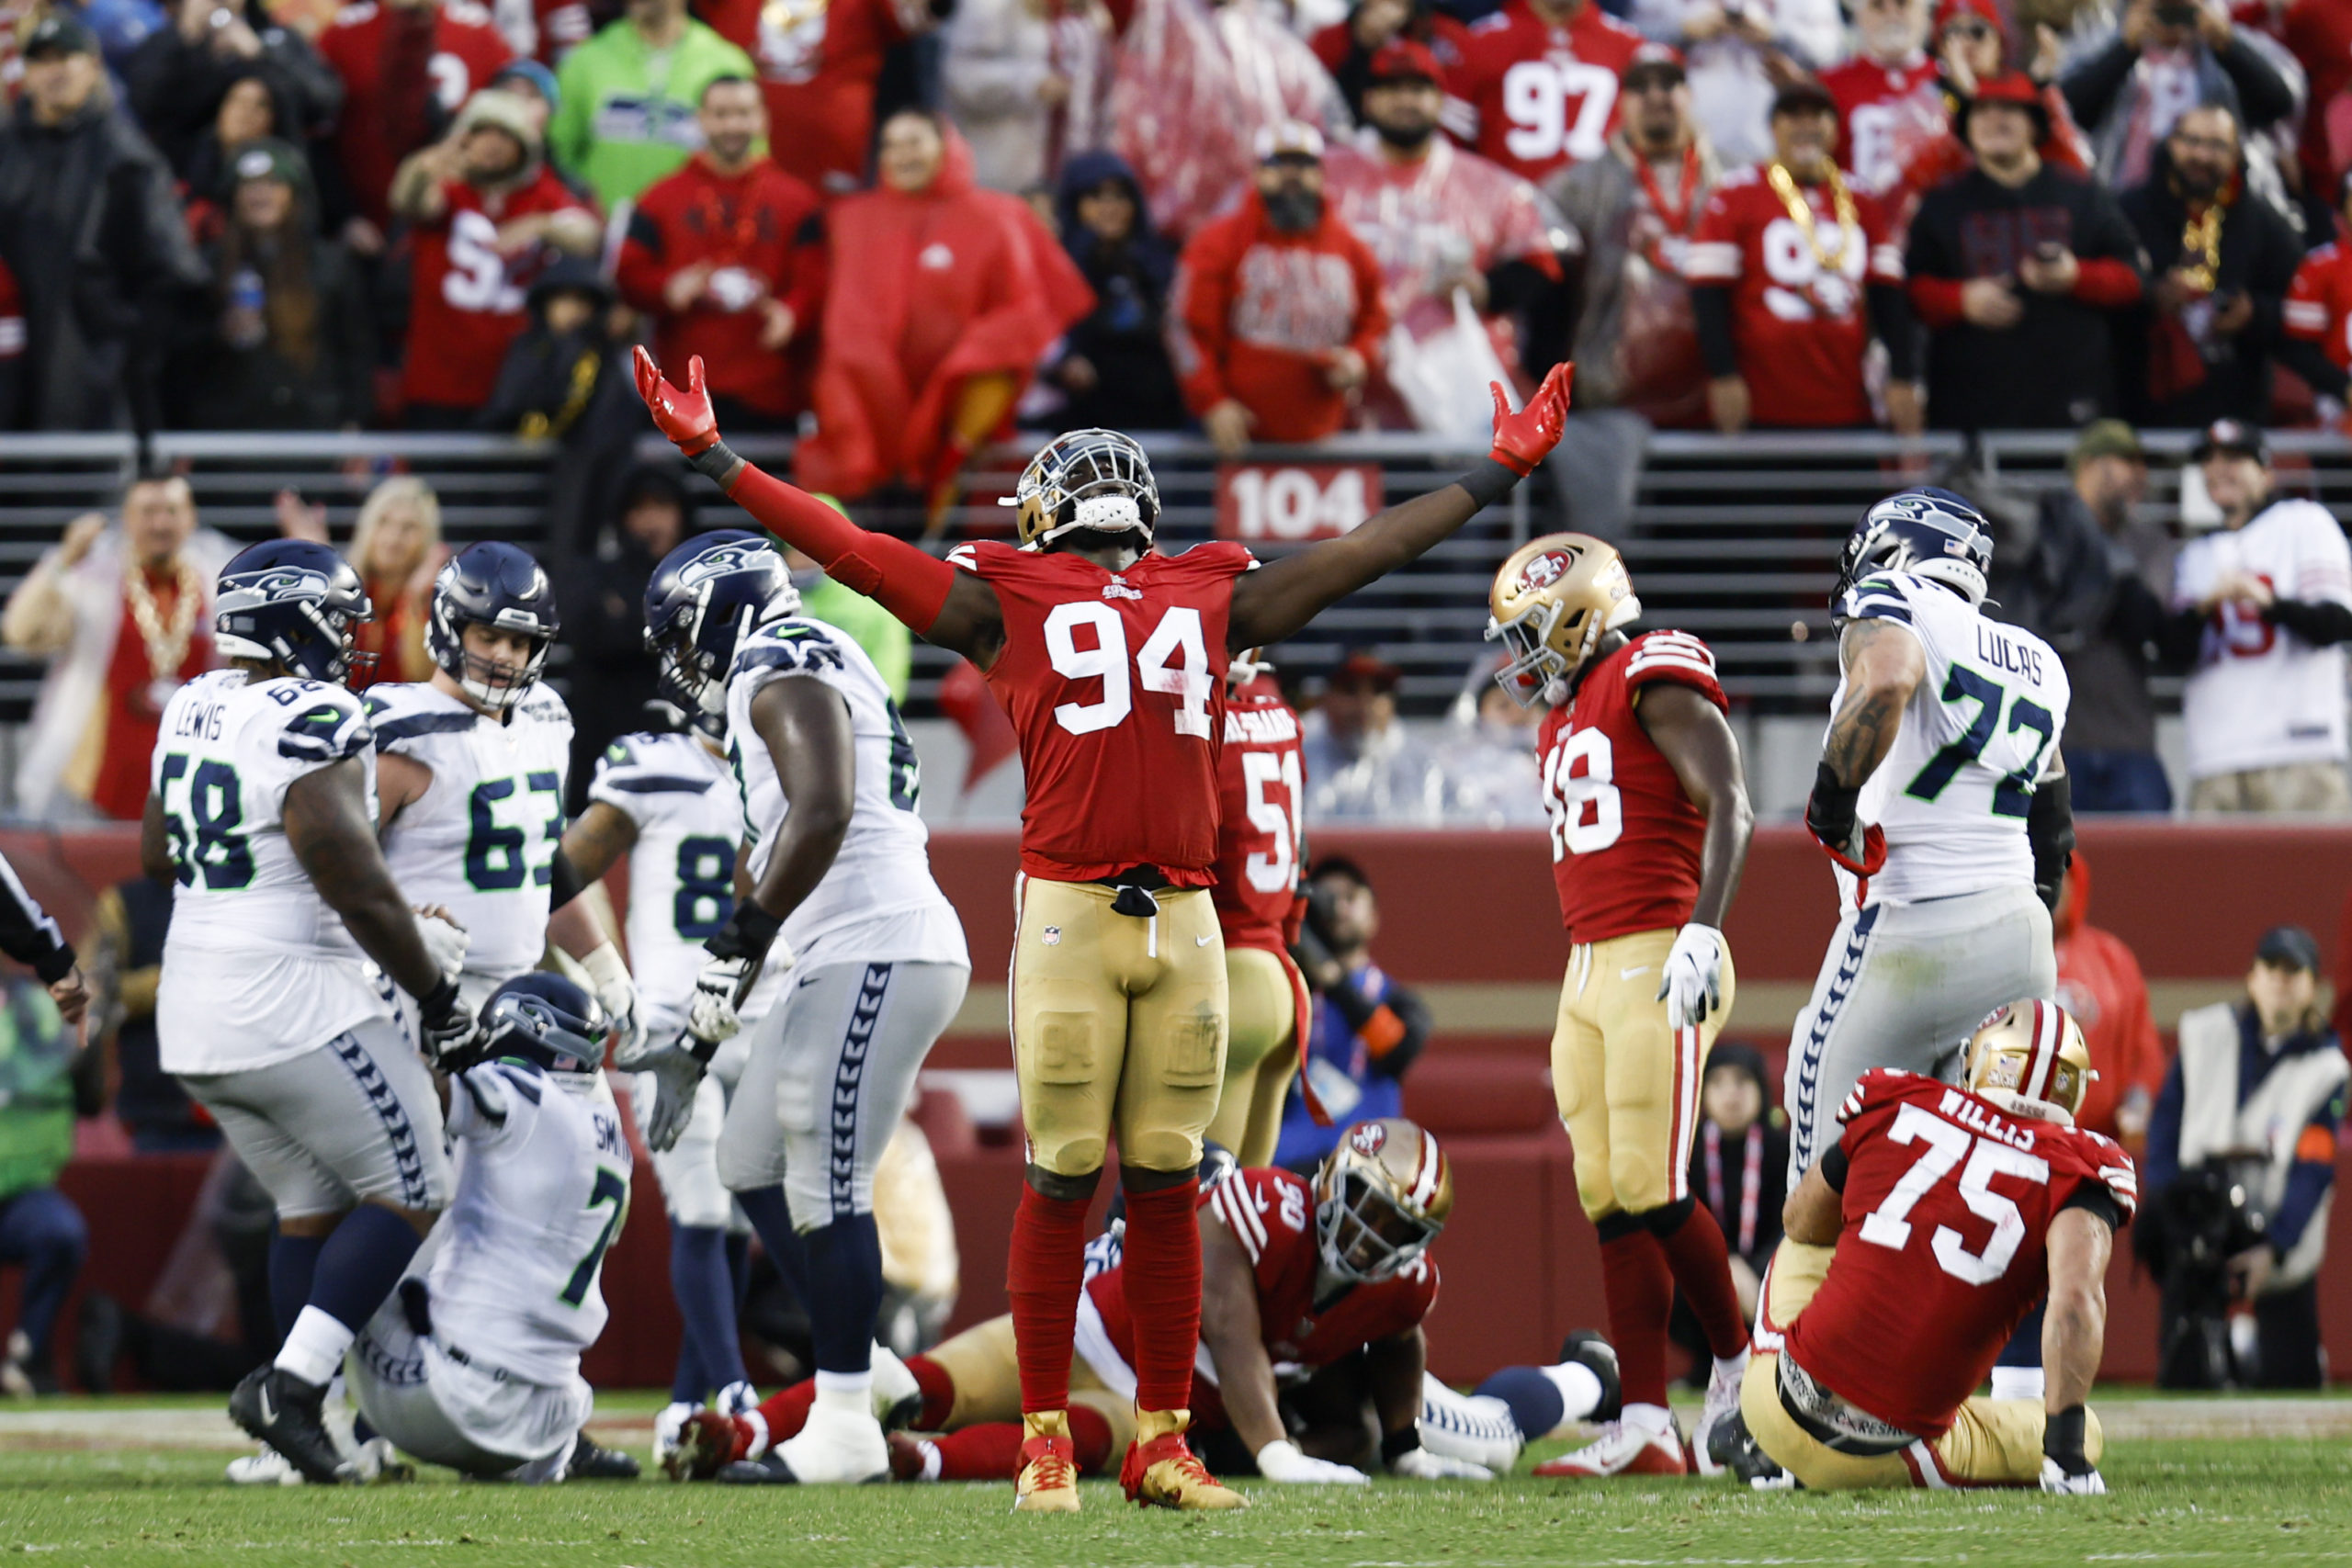 San Francisco 49ers defensive end Charles Omenihu, number 94, celebrates during the NFL wild card playoff game against the Seattle Seahawks in Santa Clara, California, on Jan. 14.